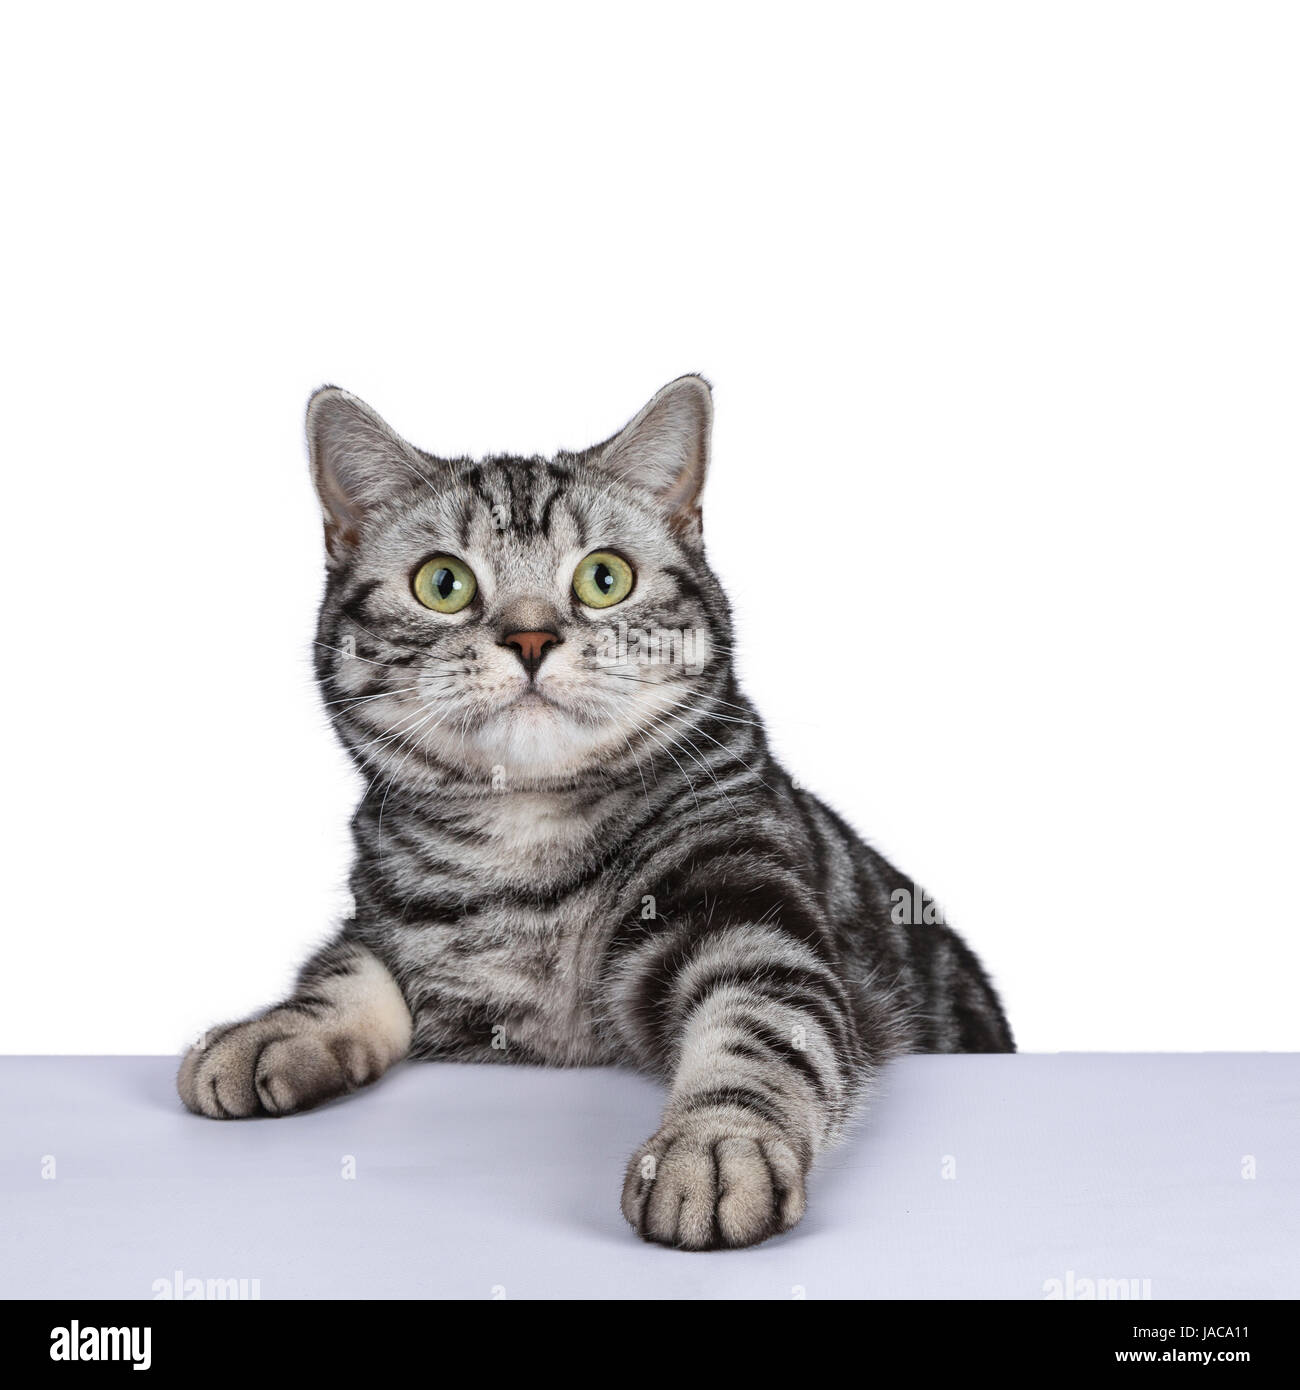 Grumpy Tabby Serious British Cat On A Black Background Stock Photo -  Download Image Now - iStock